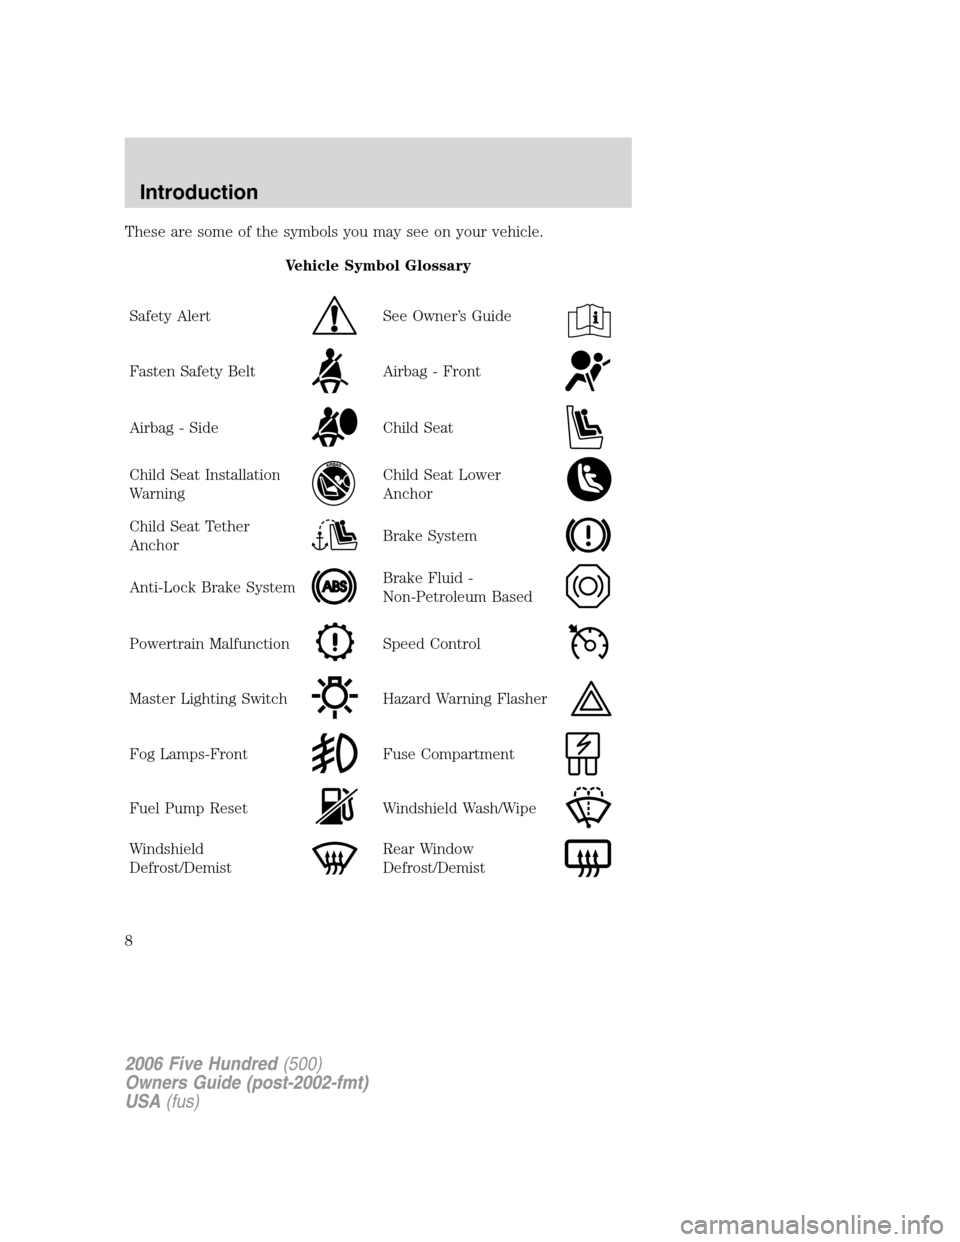 FORD FIVE HUNDRED 2006 D258 / 1.G Owners Manual These are some of the symbols you may see on your vehicle.
Vehicle Symbol Glossary
Safety Alert
See Owner’s Guide
Fasten Safety BeltAirbag - Front
Airbag - SideChild Seat
Child Seat Installation
War